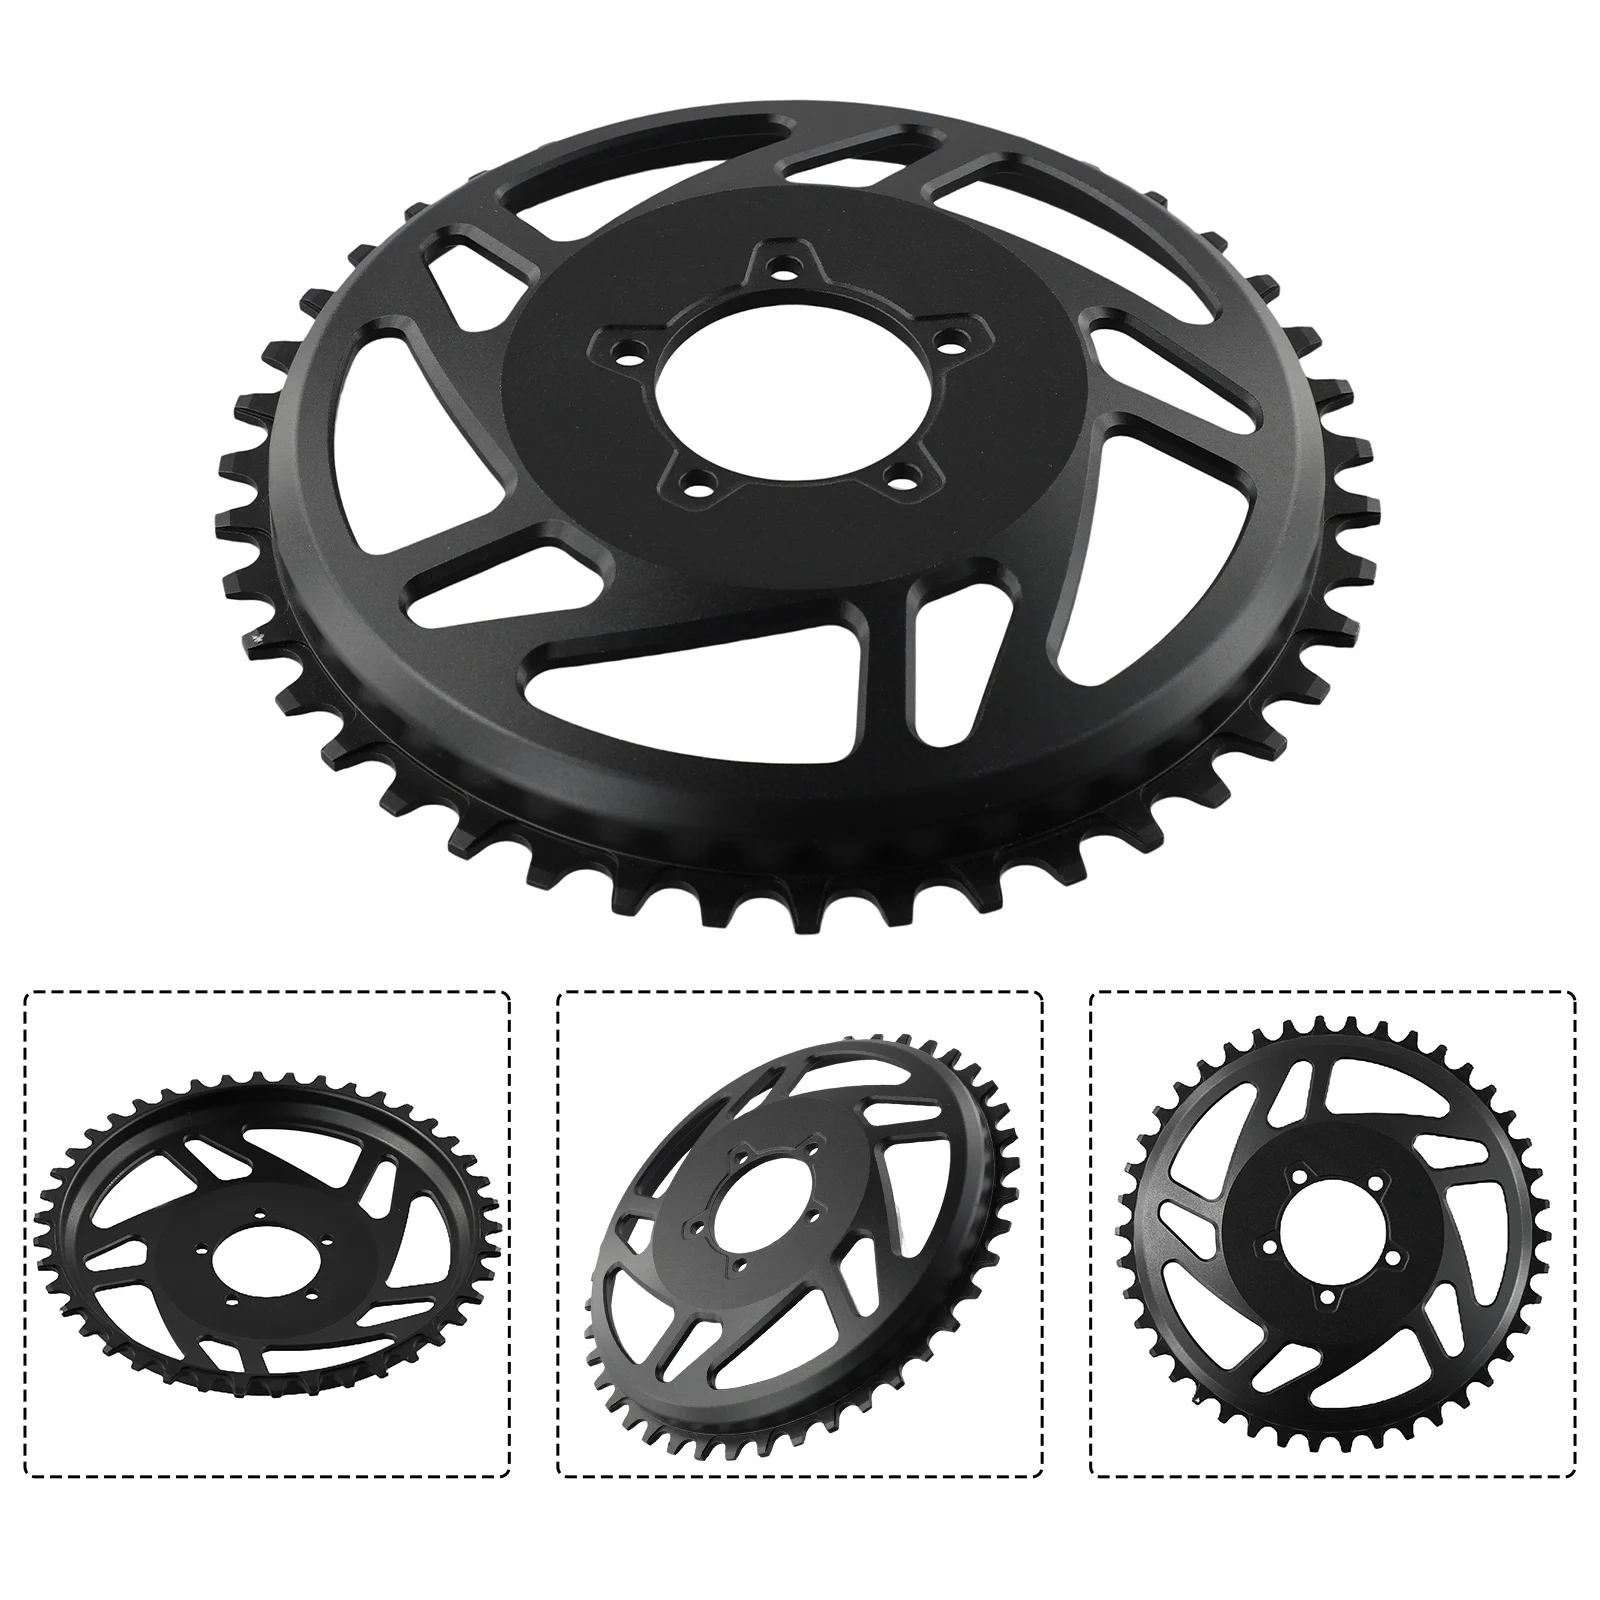 2021-best-bike-accessories-chain-ring-practical-repalcement-universal-easy-to-use-offset-correction-bafang-bbshd